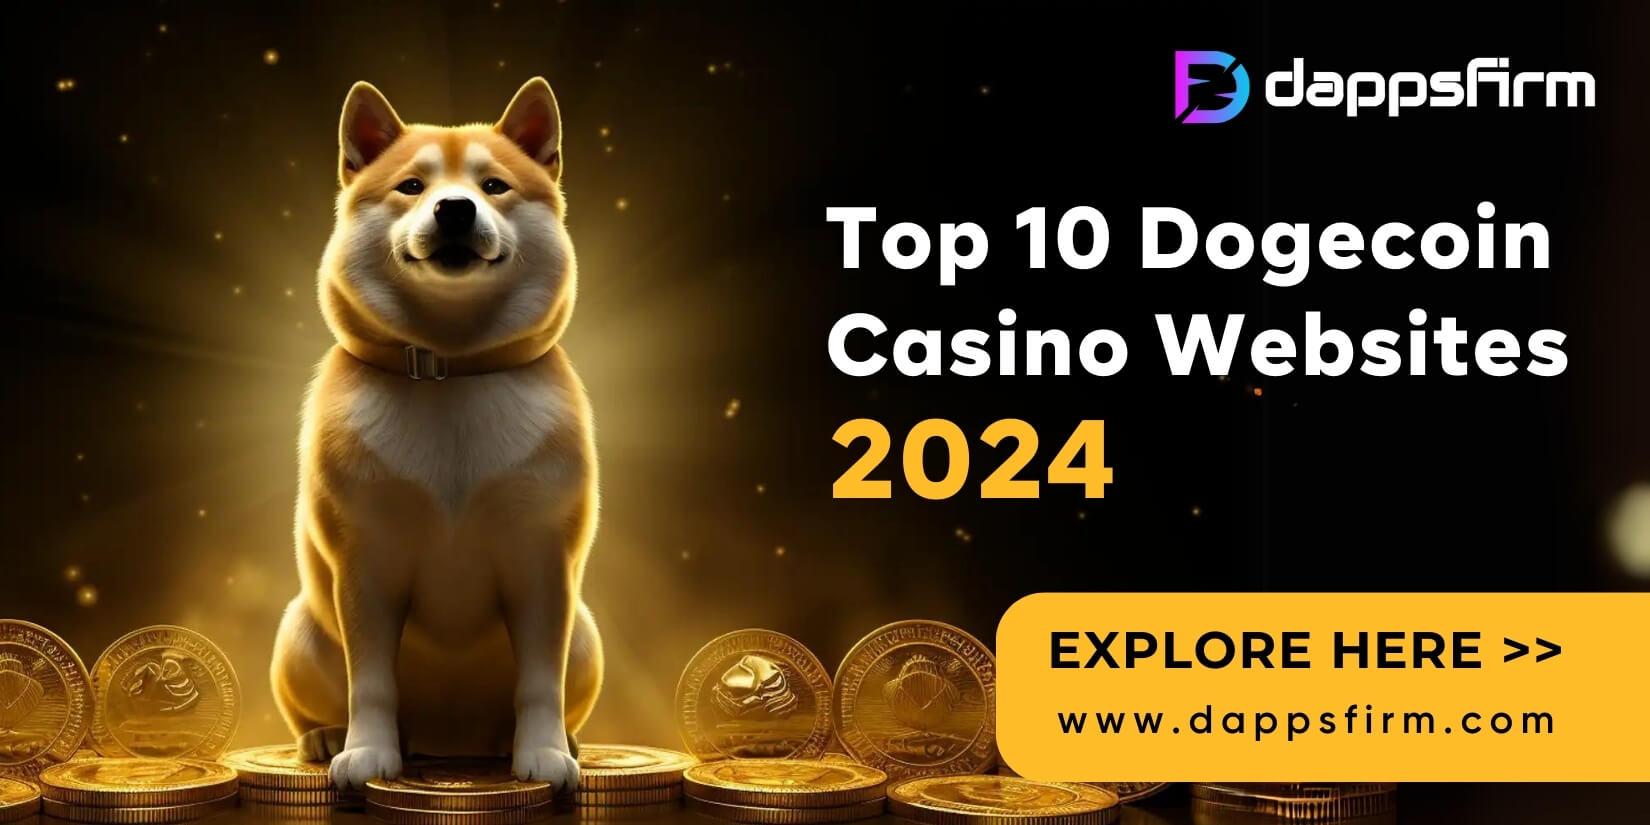 The 10 Best Dogecoin Dice Sites in 